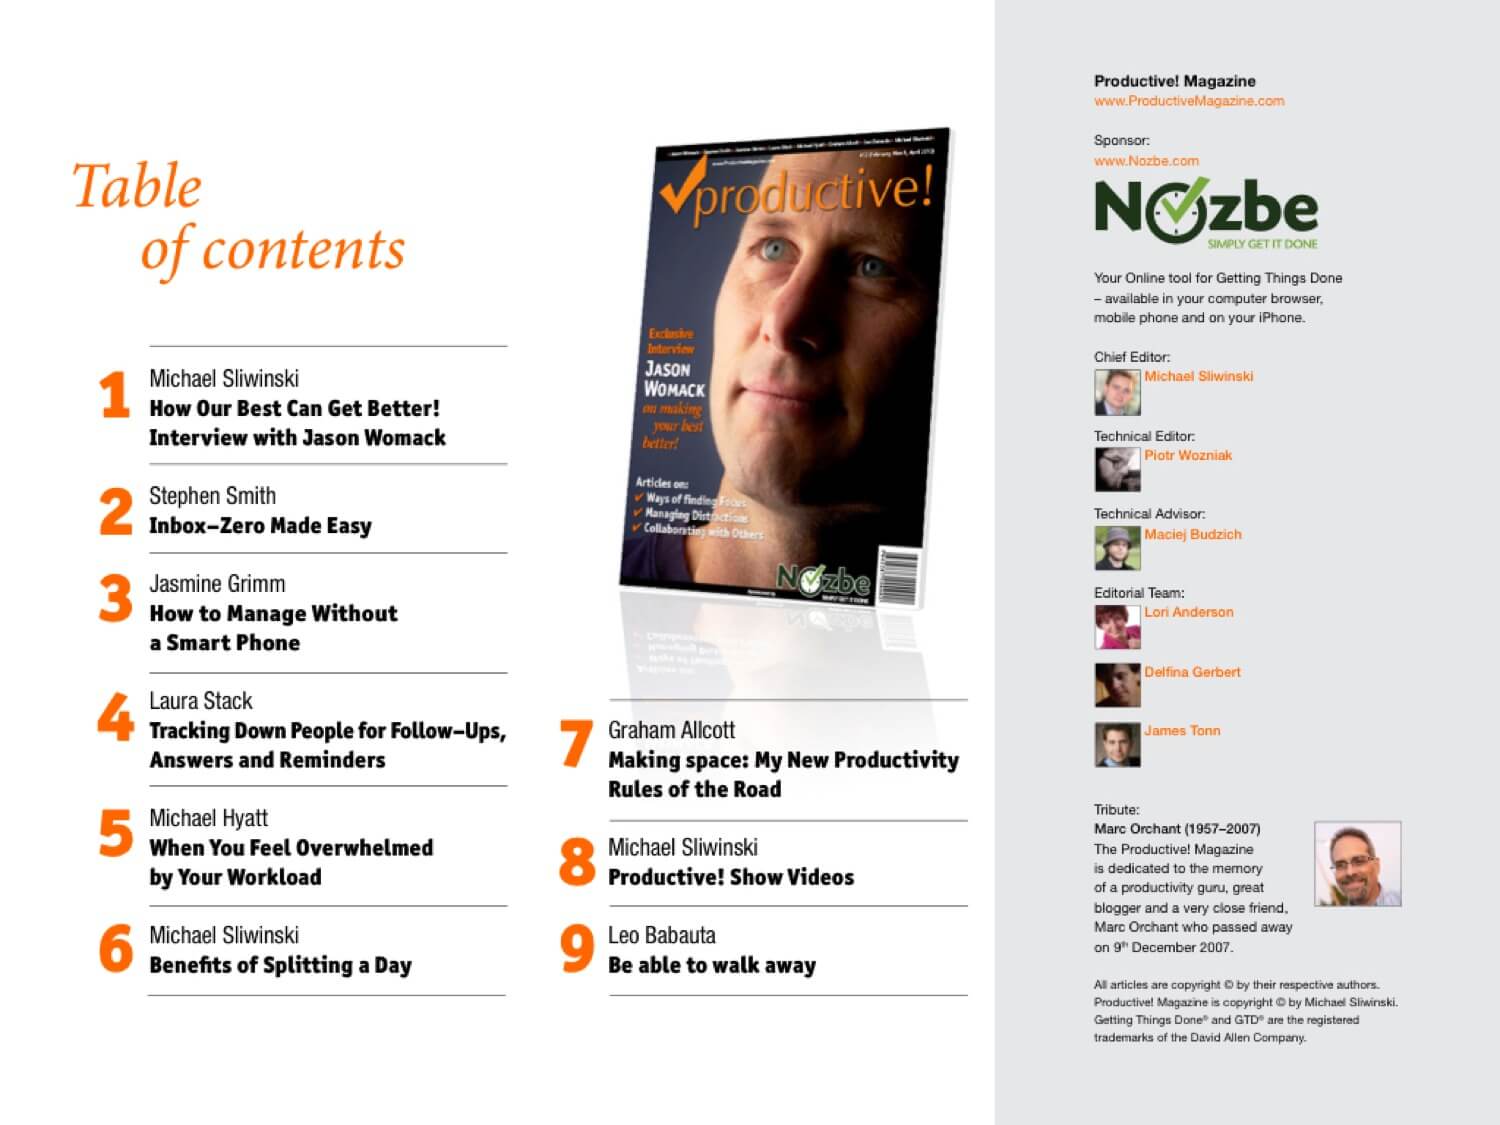 What’s inside of Productive! Magazine #12 with Jason Womack? Great articles!